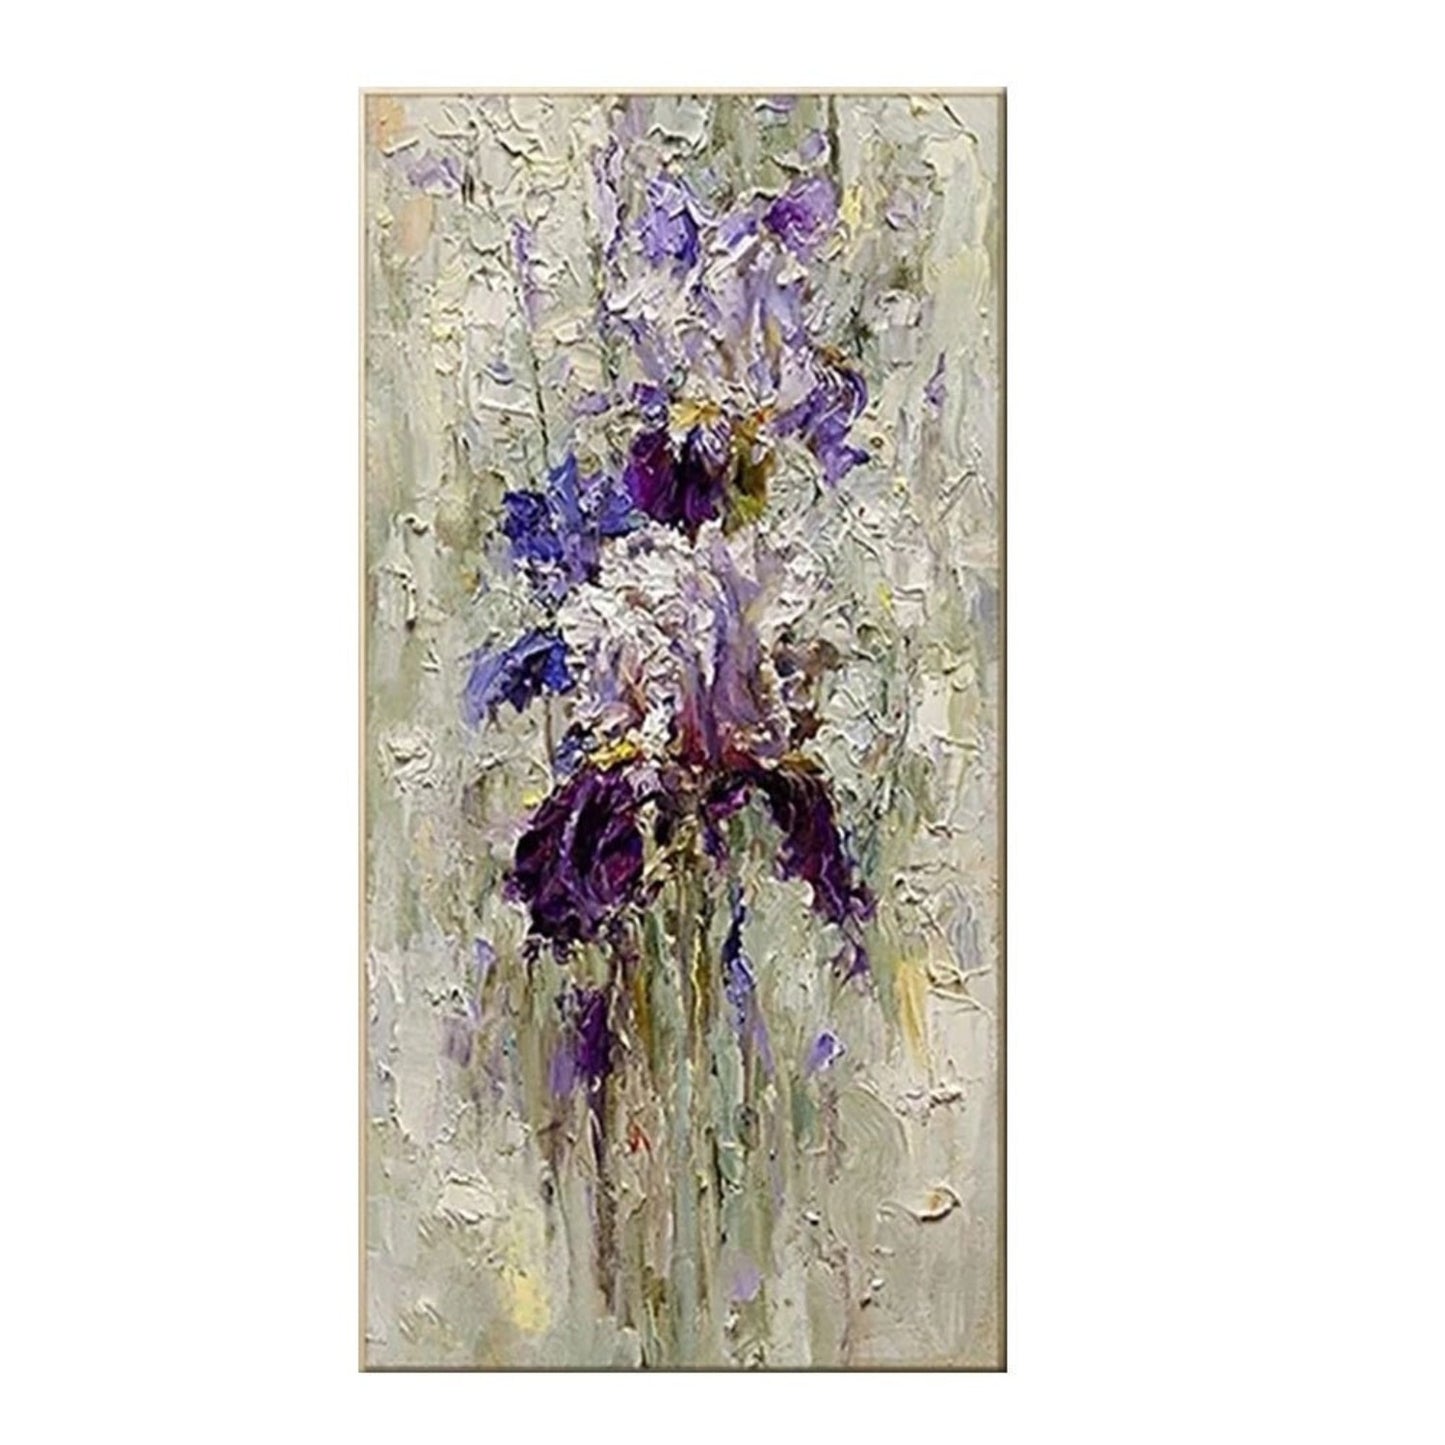 Abstract Violet Flowers 100% Hand Painted Wall Art